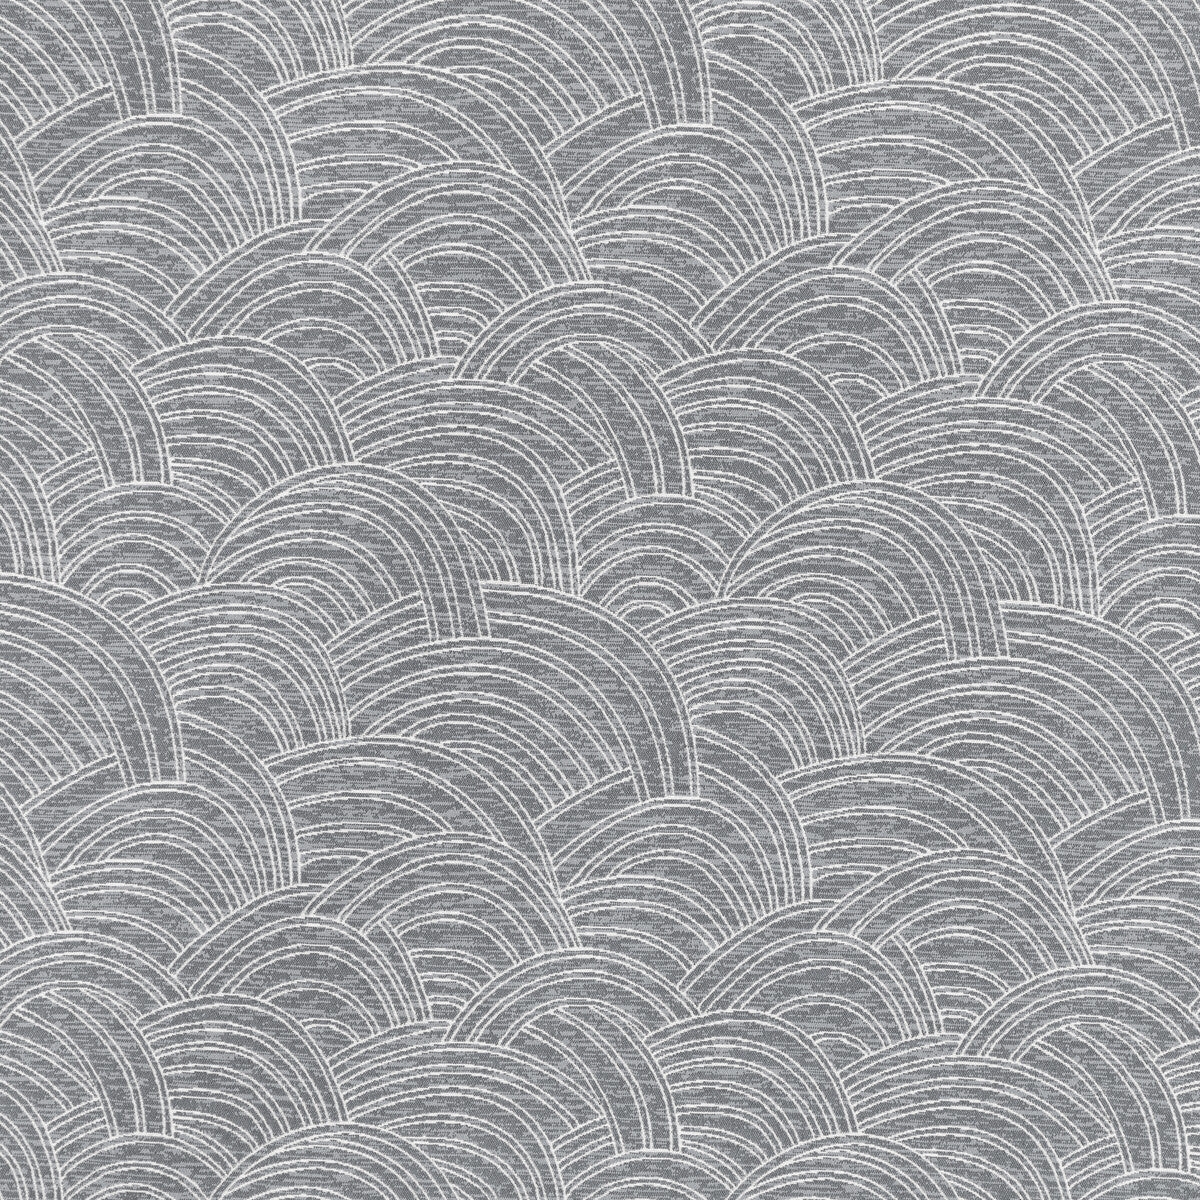 Hopper fabric in graphite color - pattern 36062.11.0 - by Kravet Basics in the Monterey collection